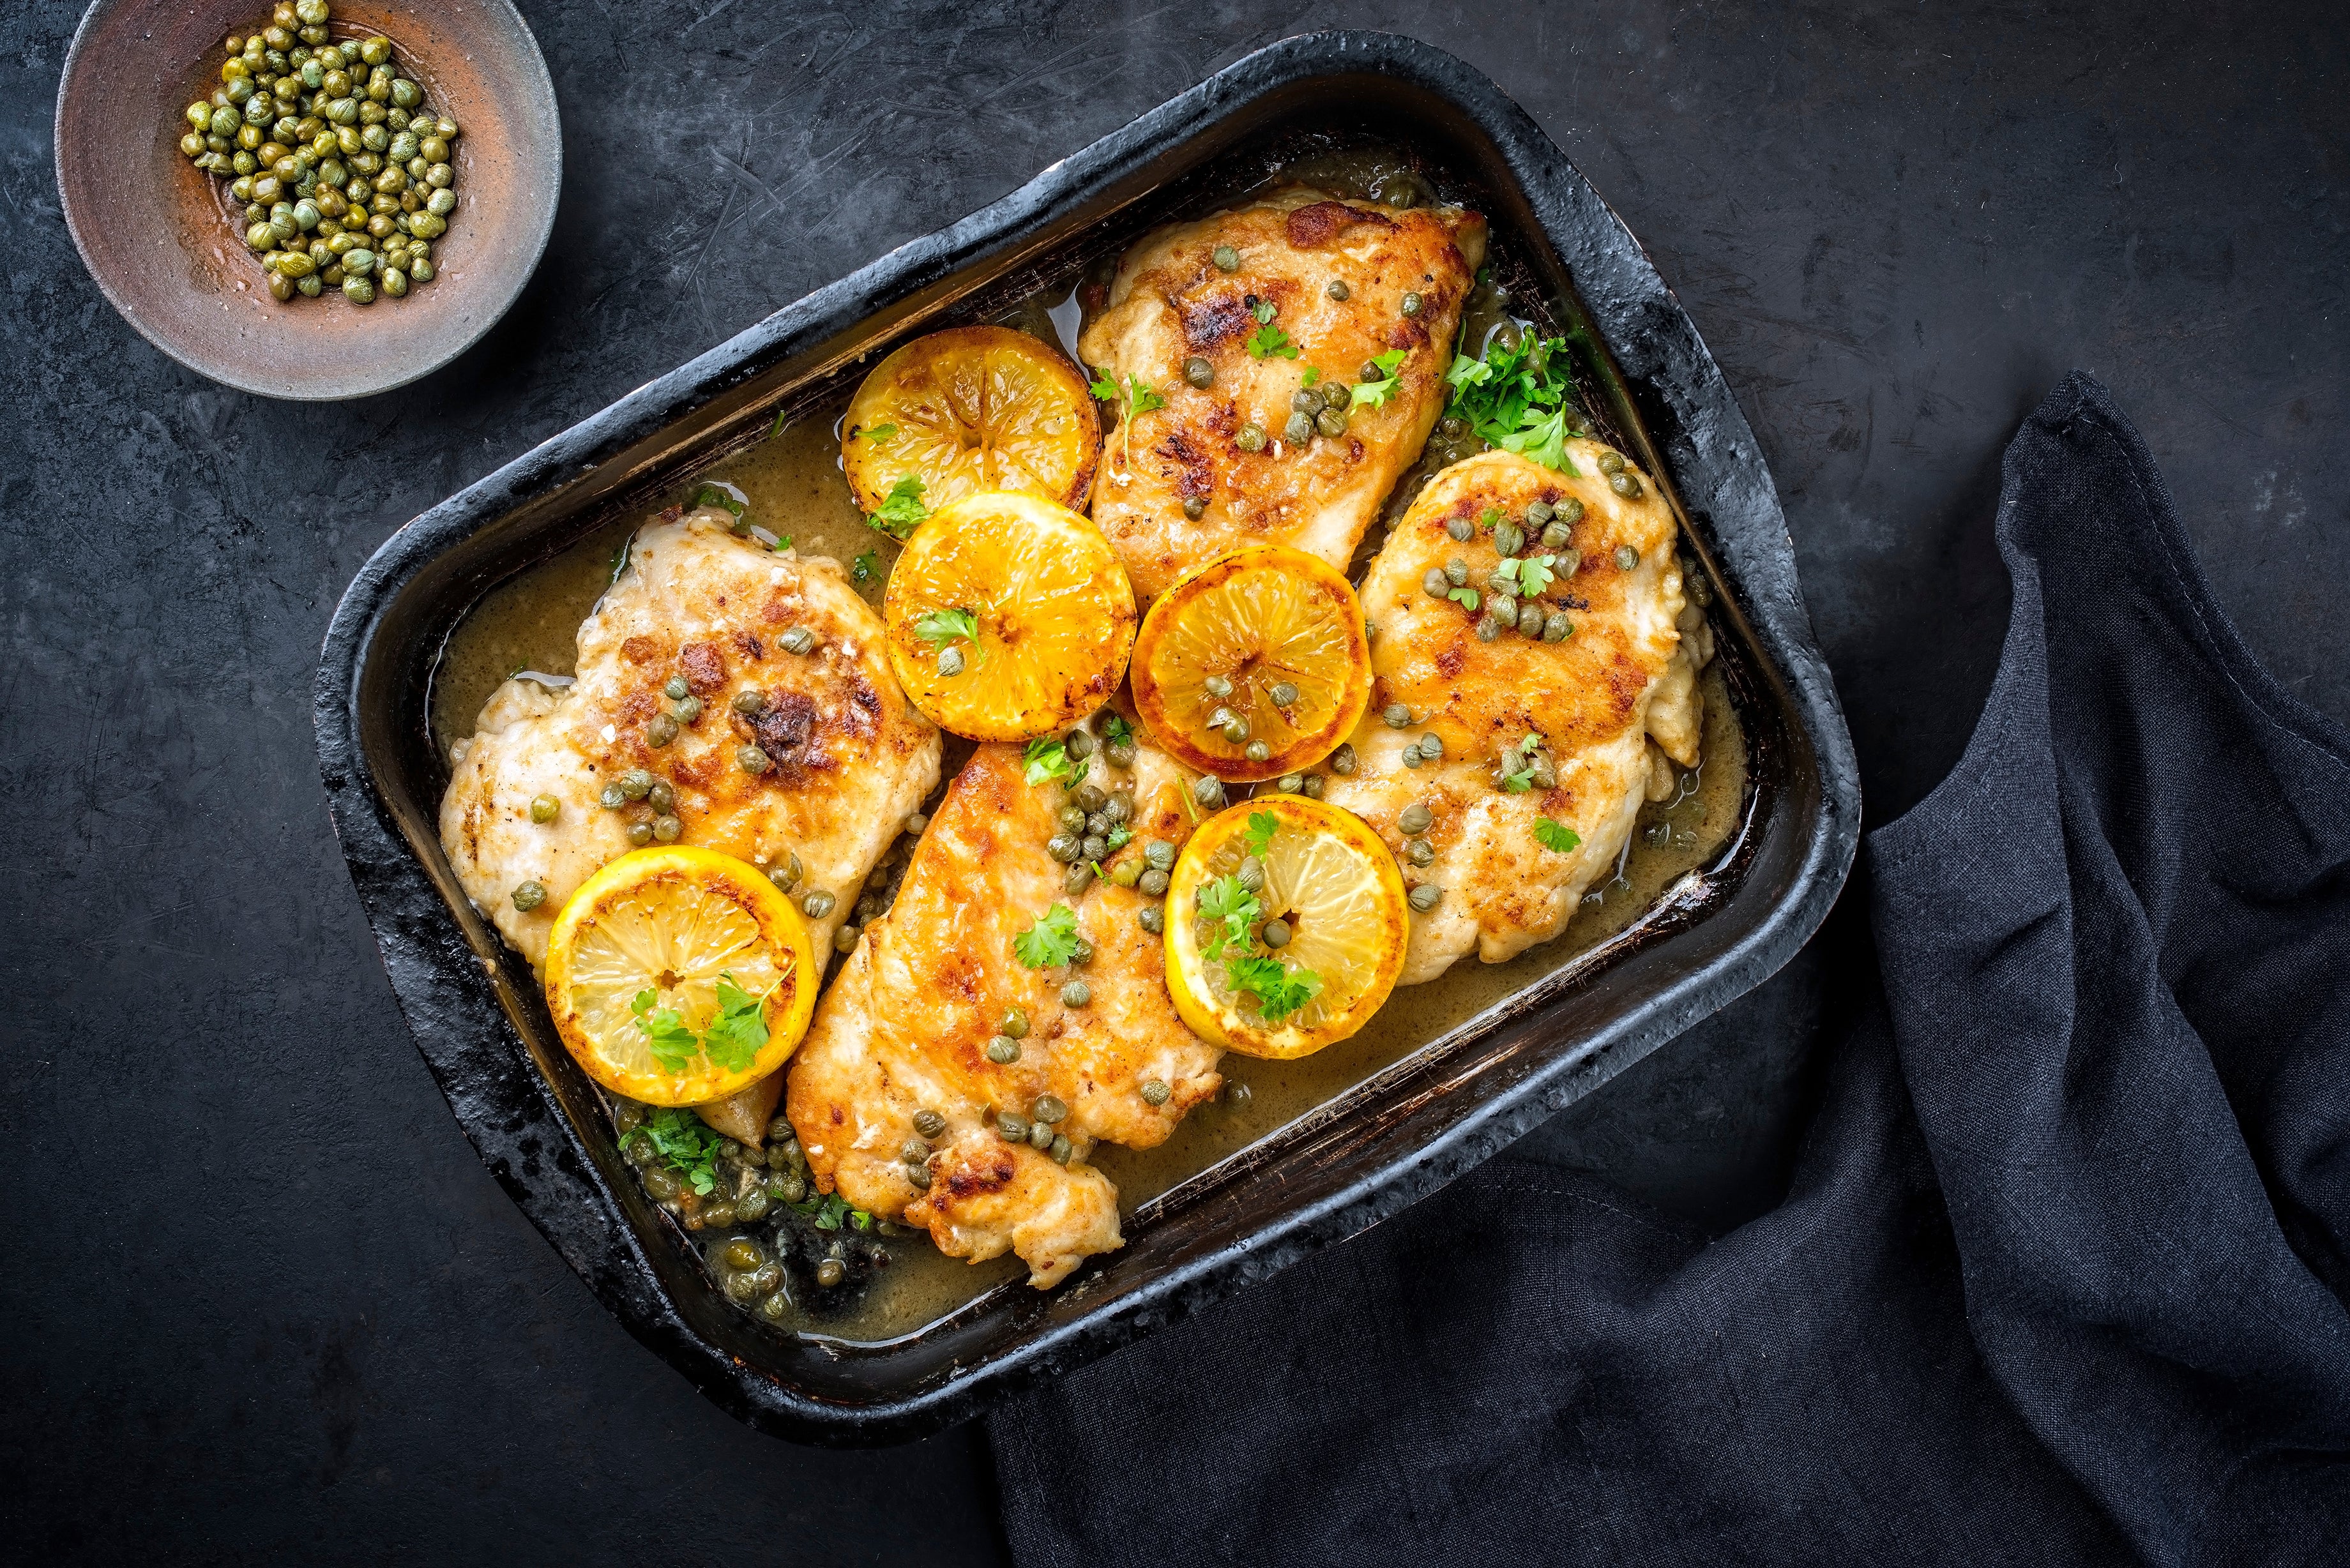 Chicken dish made with lemon juice, garlic, and herbs such as rosemary and thyme.